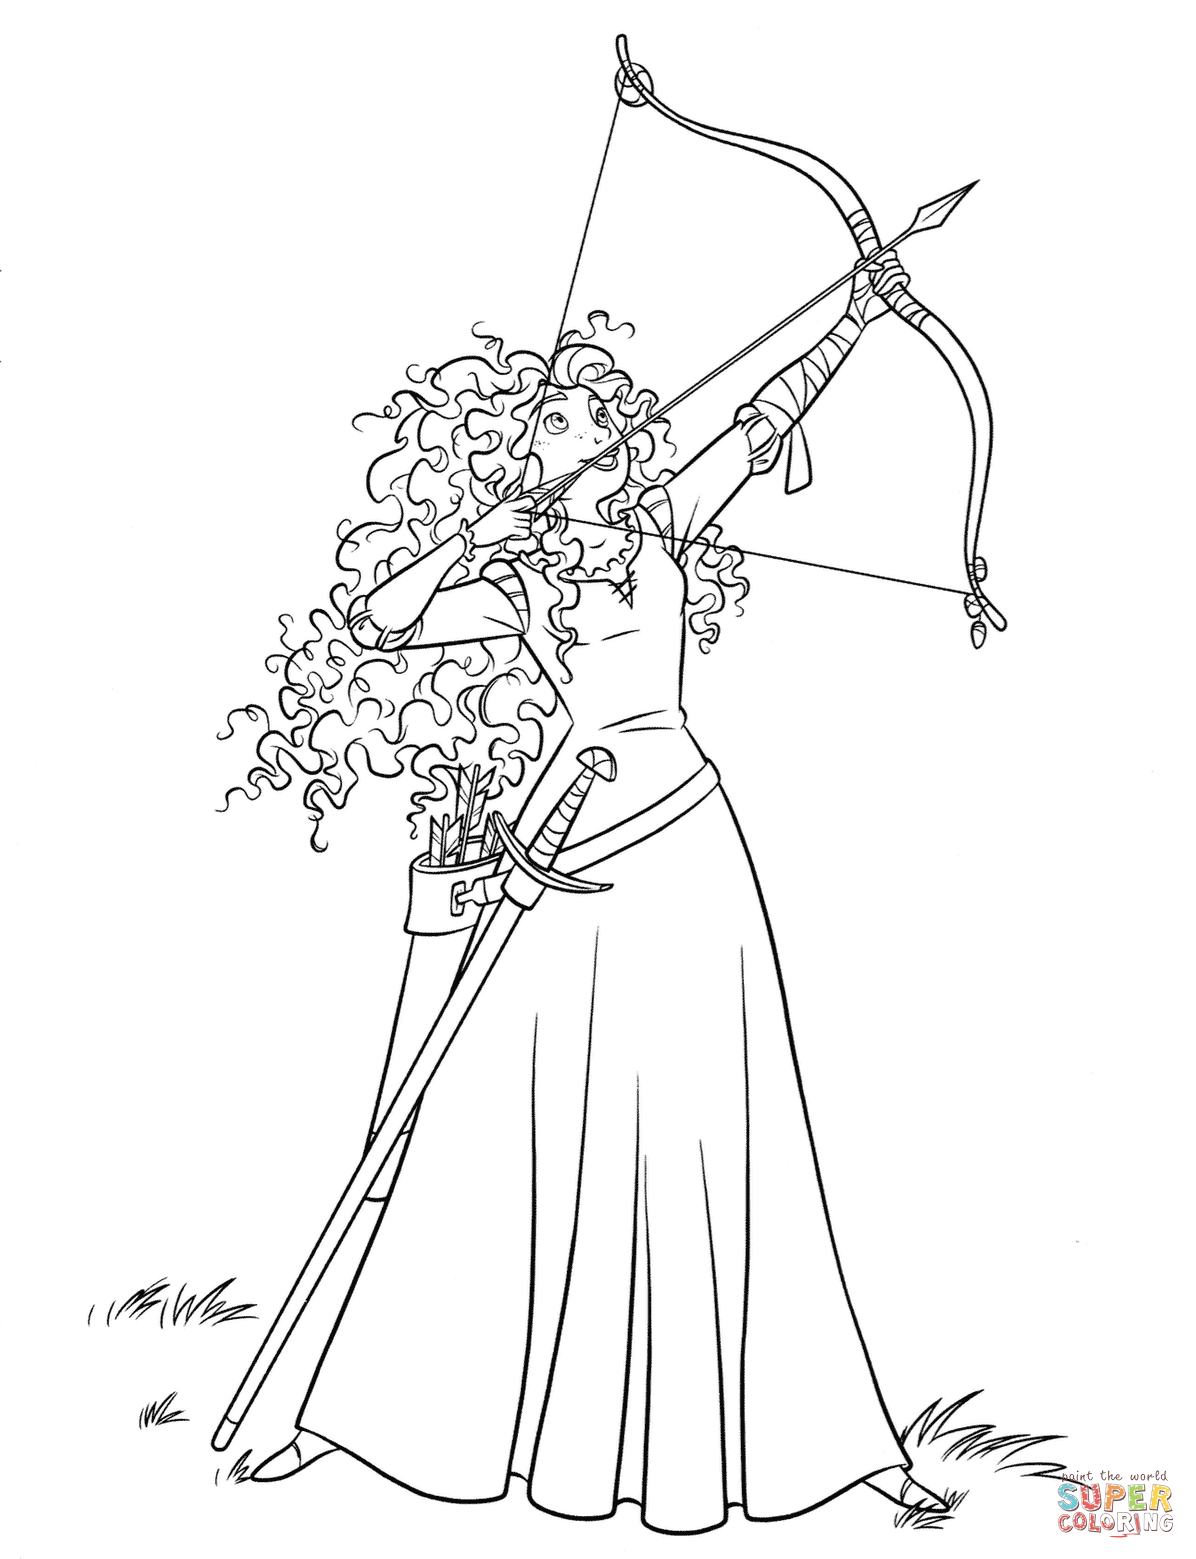 Brave coloring pages | Free Coloring Pages